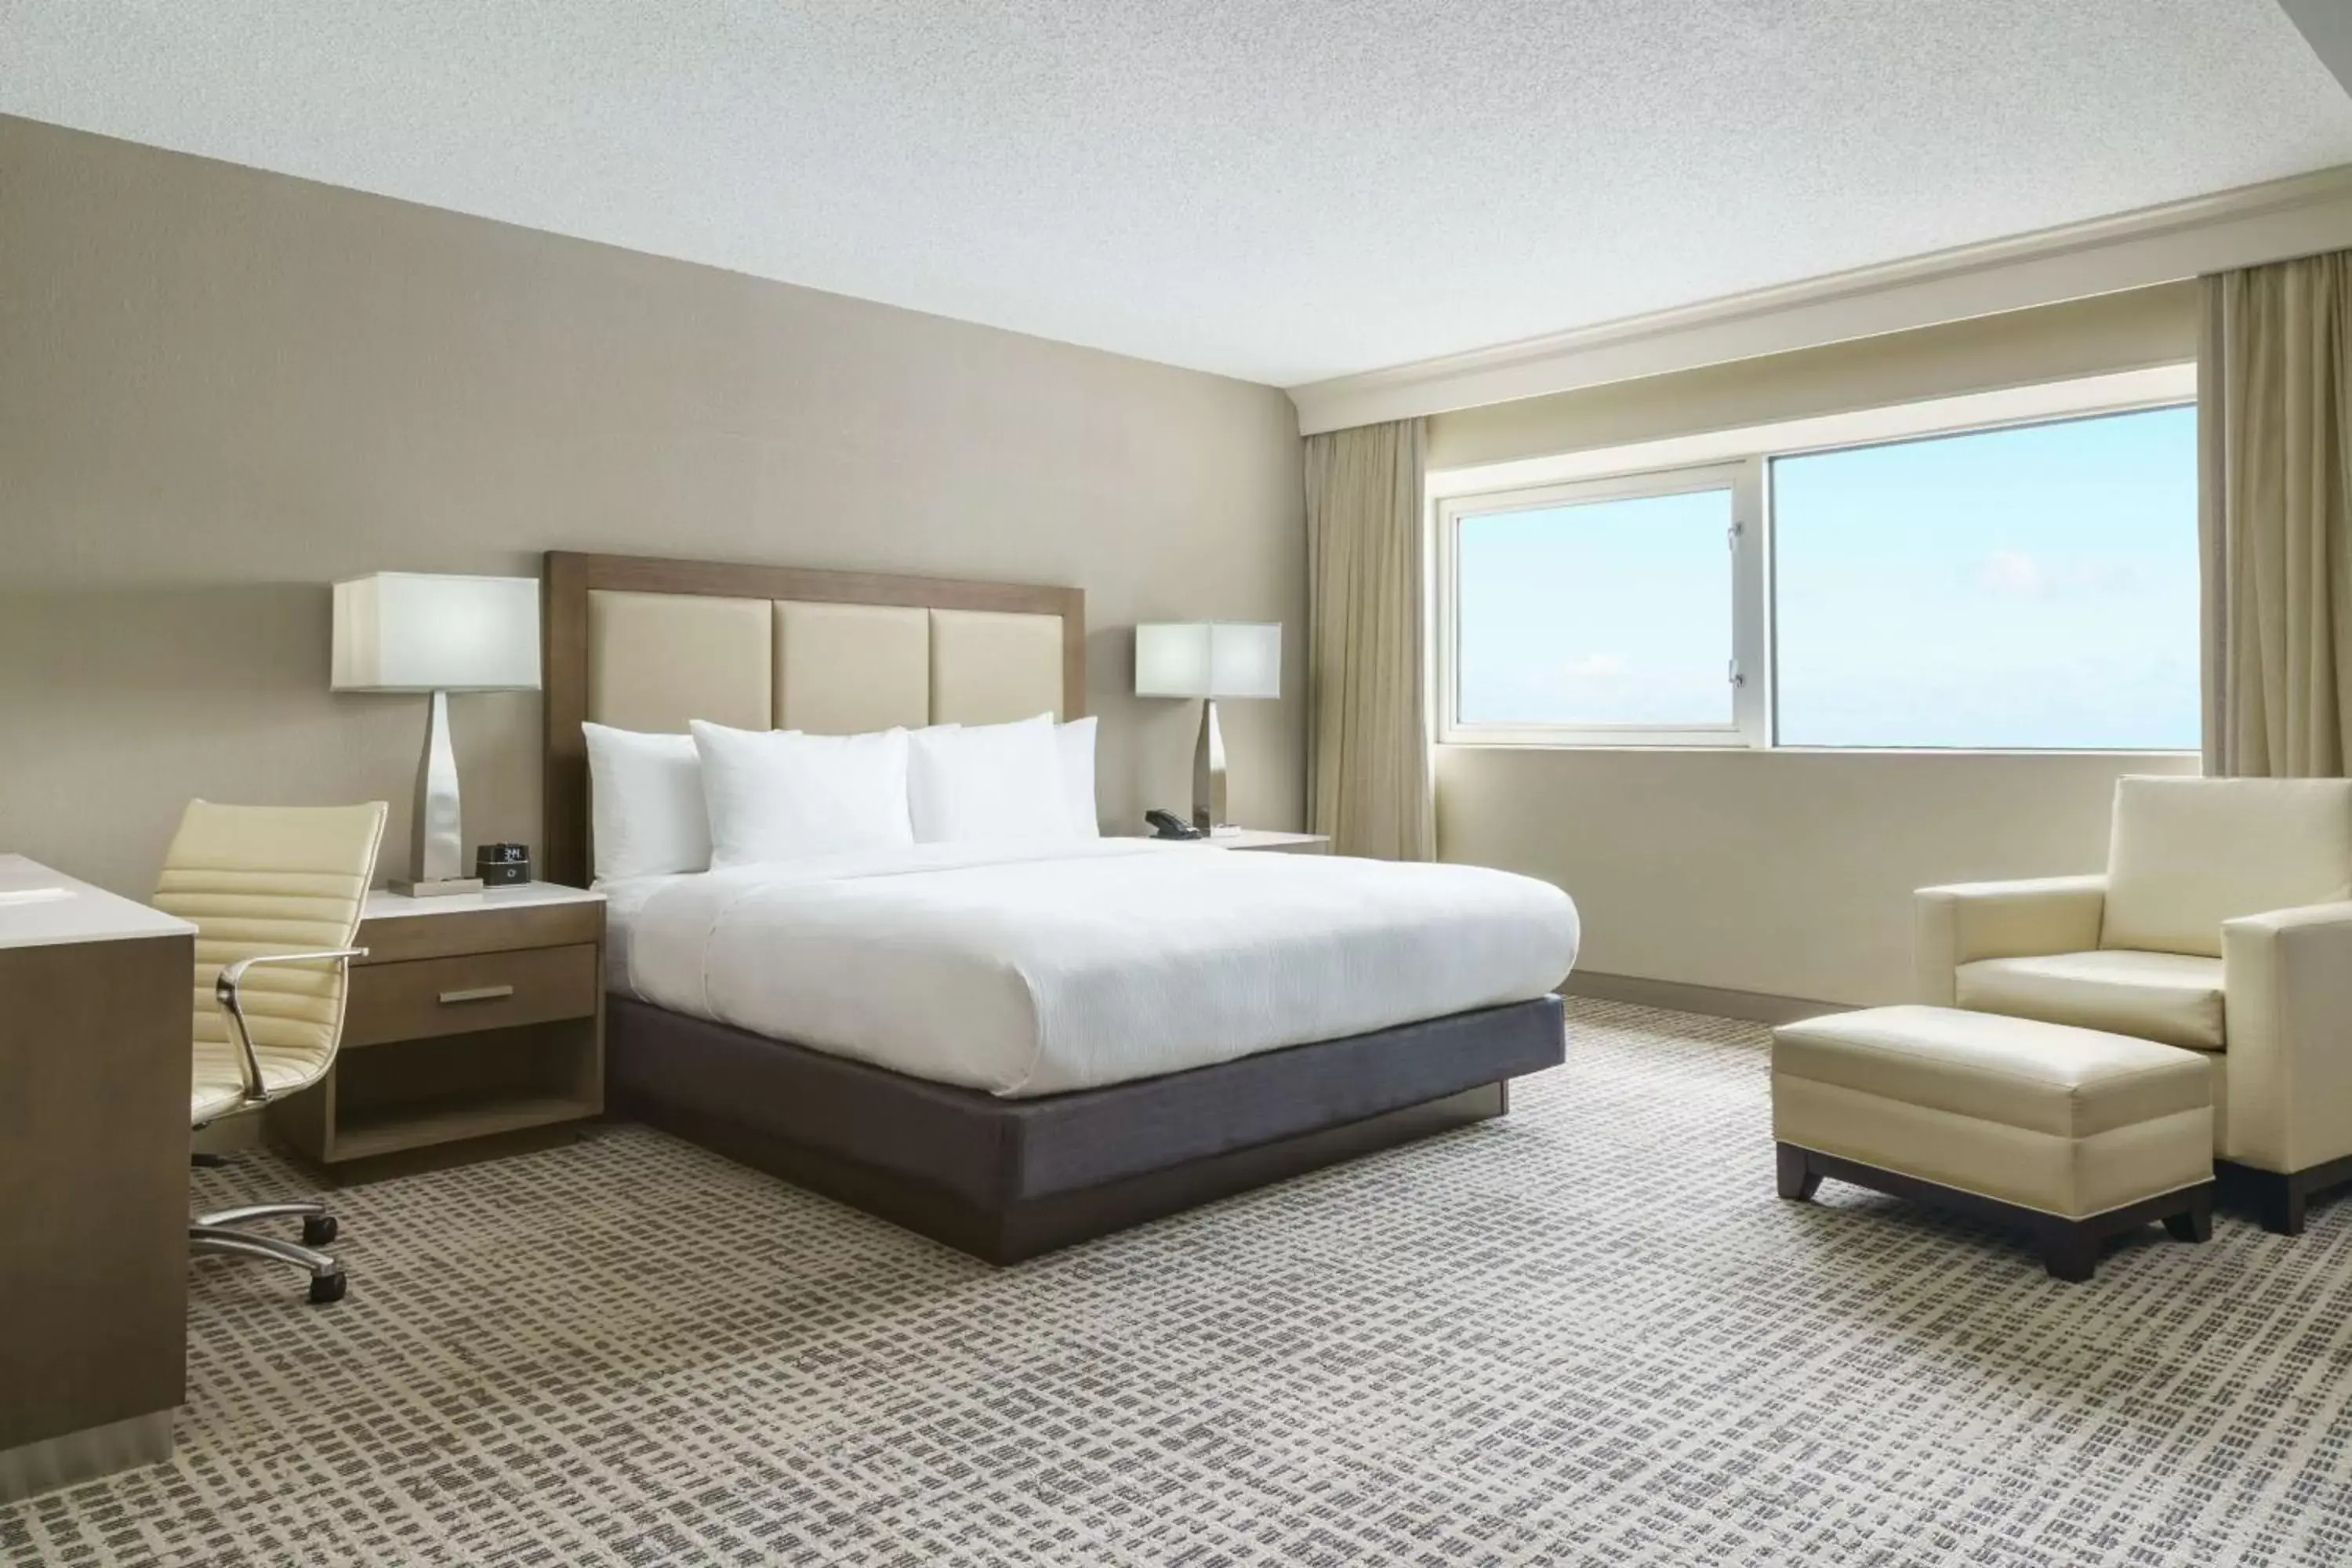 Bedroom in DoubleTree by Hilton Orlando Airport Hotel